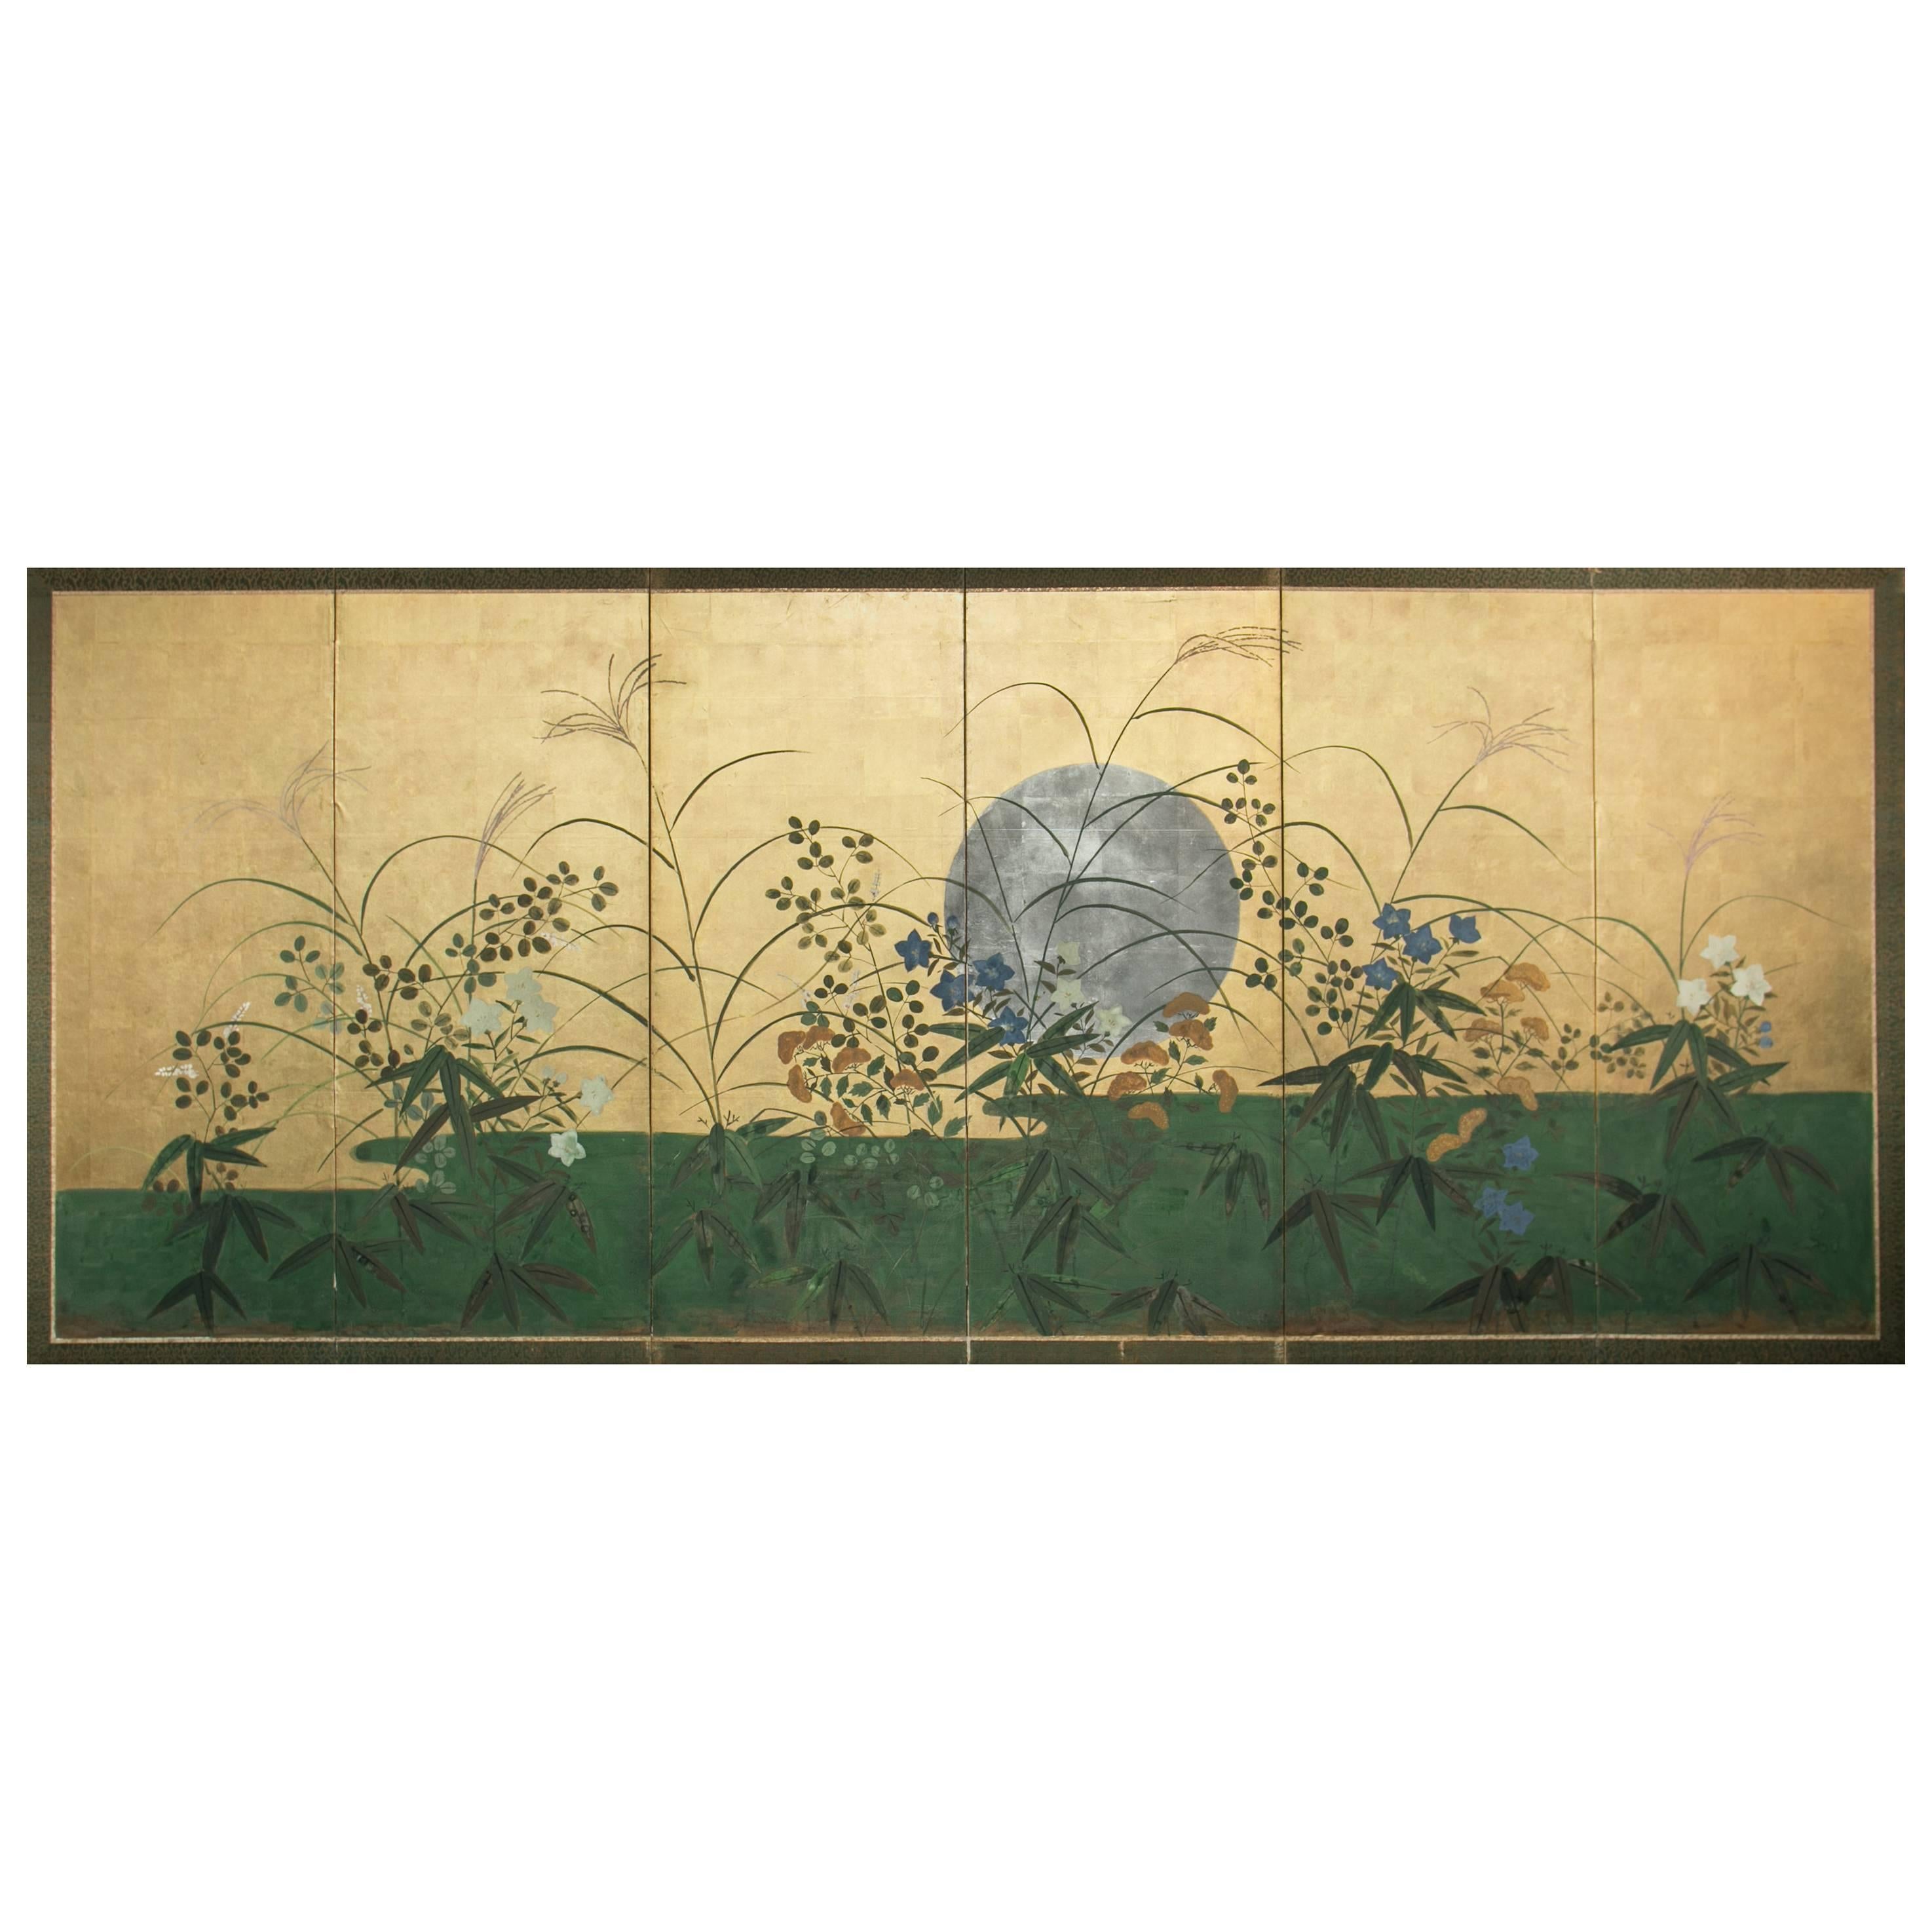 19th Century Japanese Six Panel Screen: Silver Moon Rising Over Summer Field